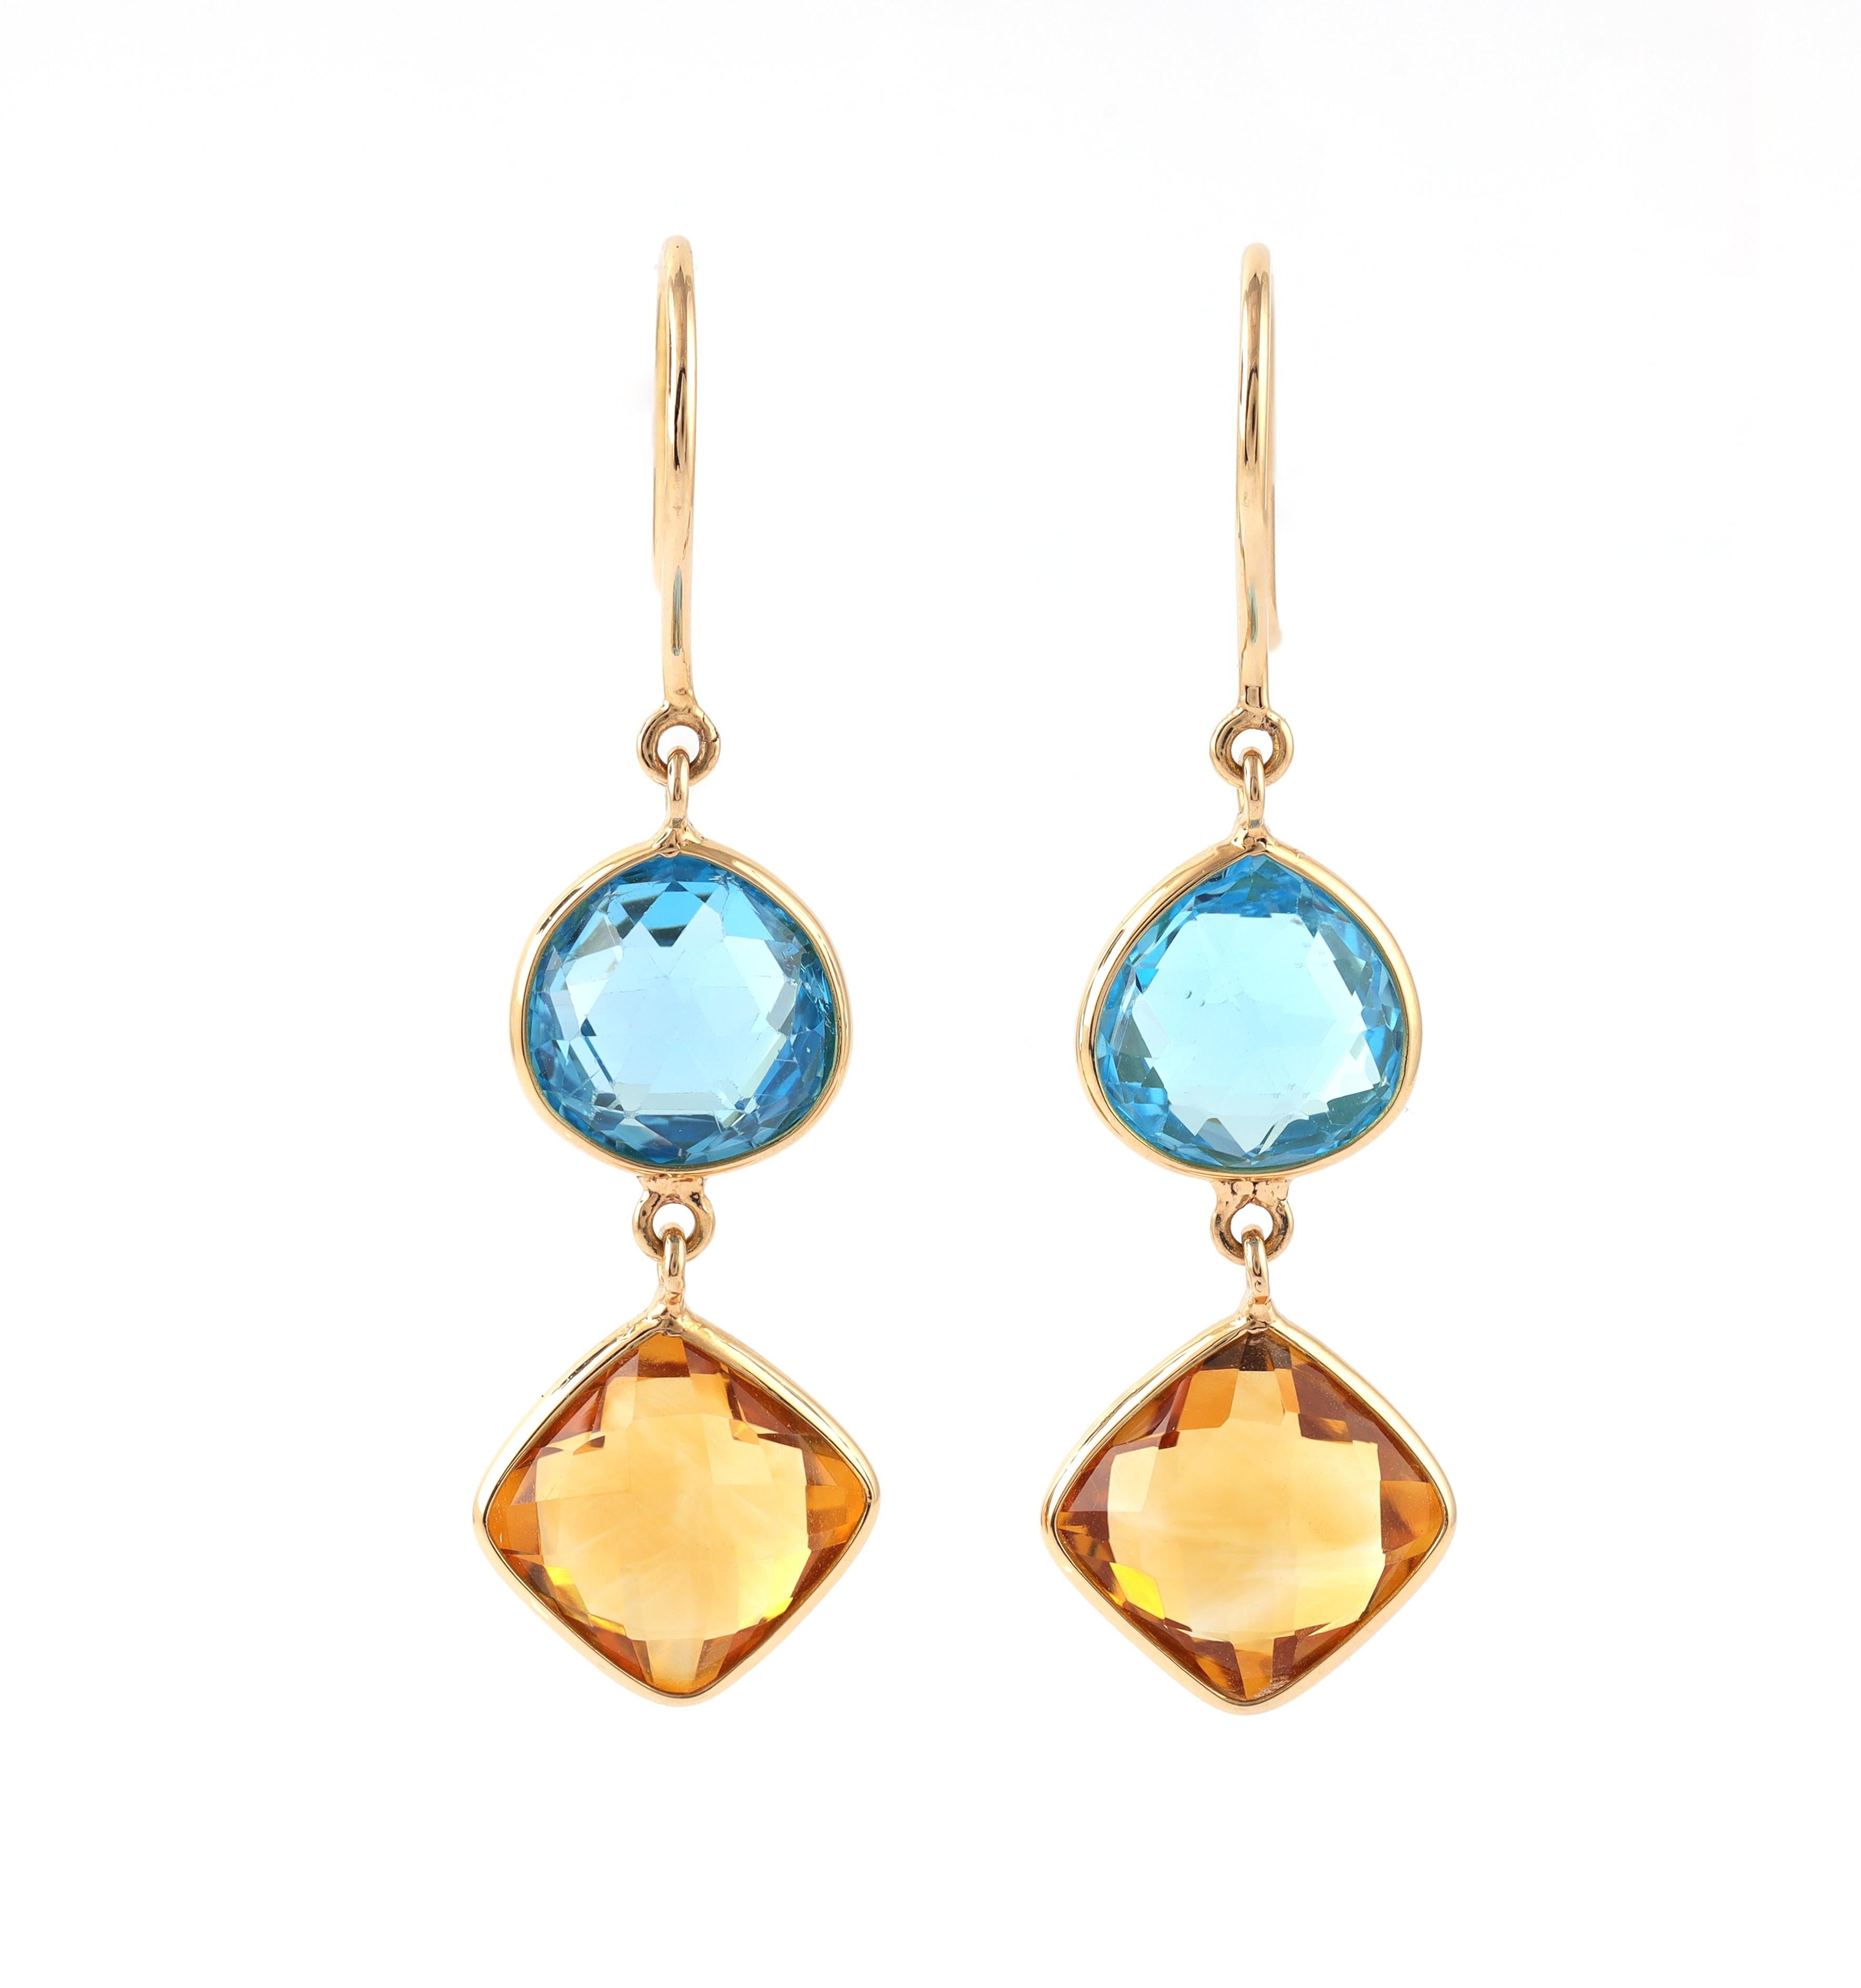 Cast in 18 karat gold, these earrings are hand set with 9.05 Carat Semi Gem Stones. Available in 18k Gold.
Composition
 Semi Gem Stones : 9.05 Carat

Gold : 1.19 gms


